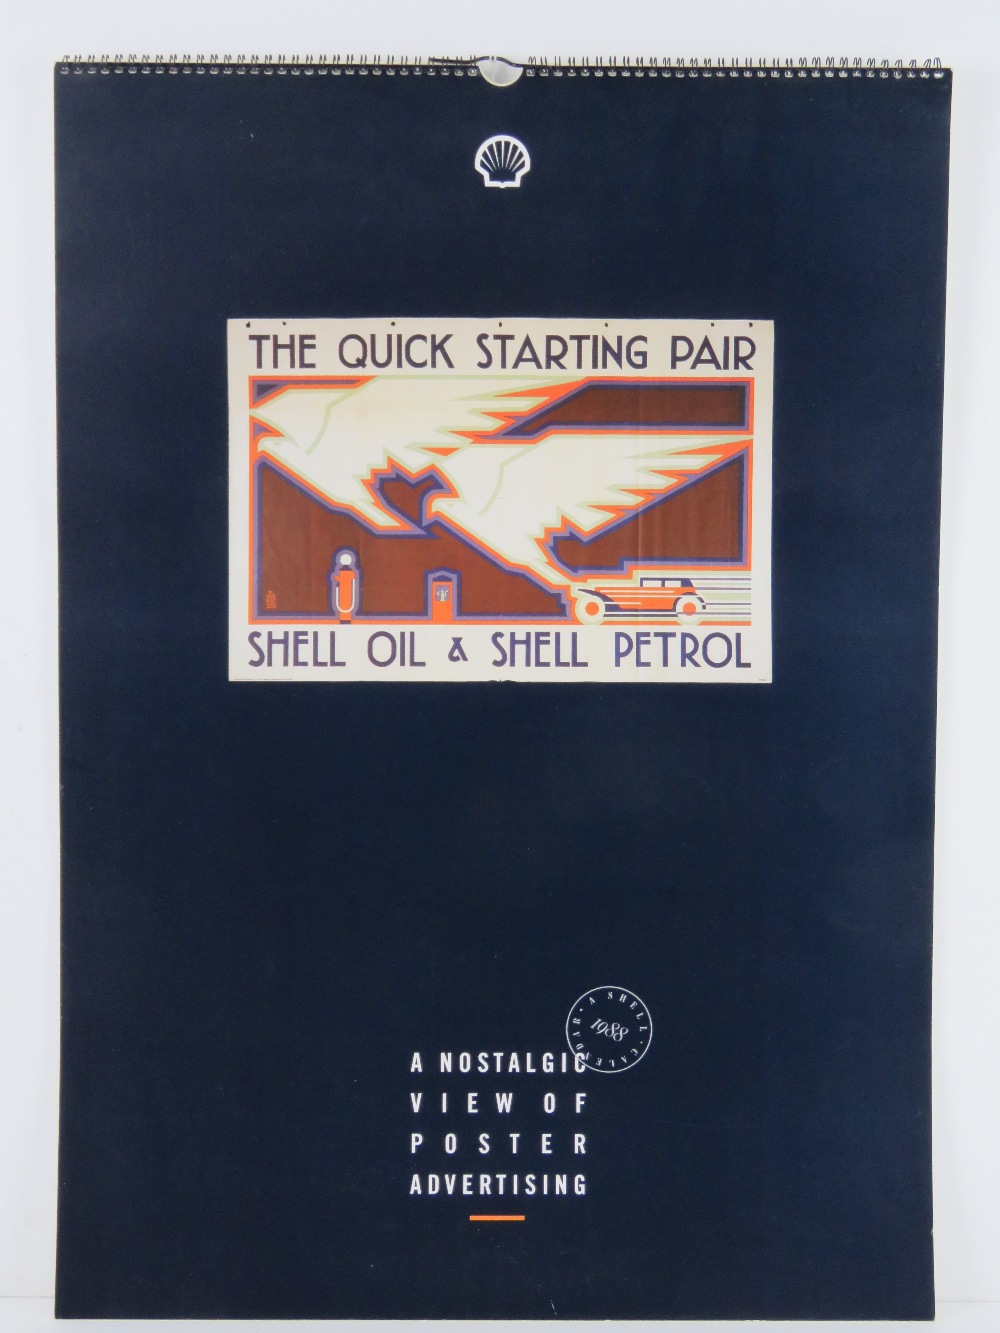 A 1988 'Quick Starting Pair' Shell Oil and petrol nostalgia calendar in 'as published' condition.